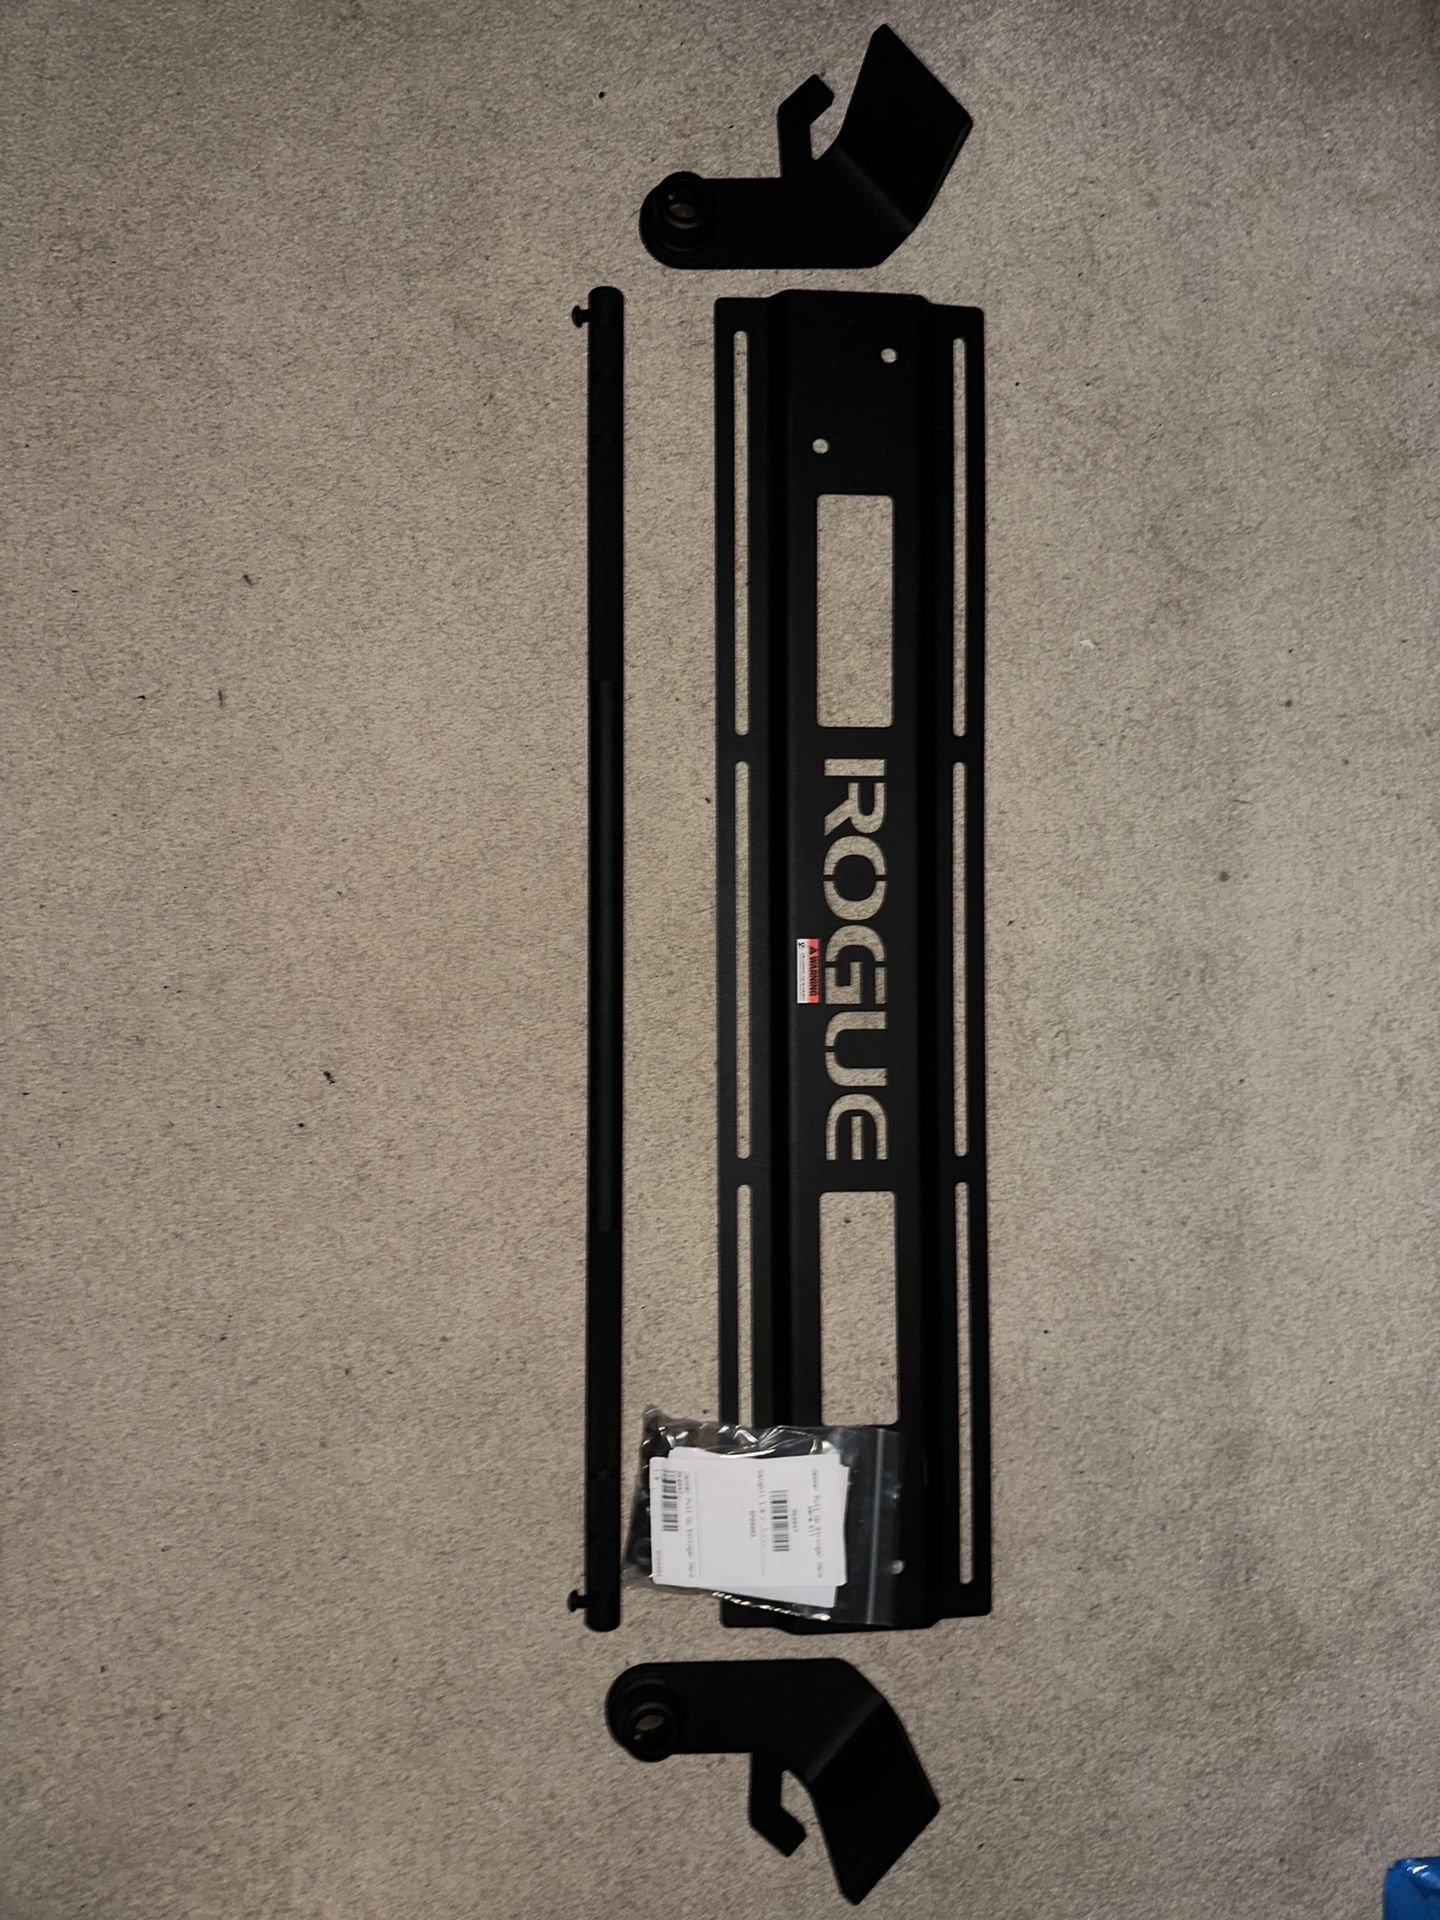 Rogue Jammer Pull Up Bar for Sale in Milford, CT - OfferUp